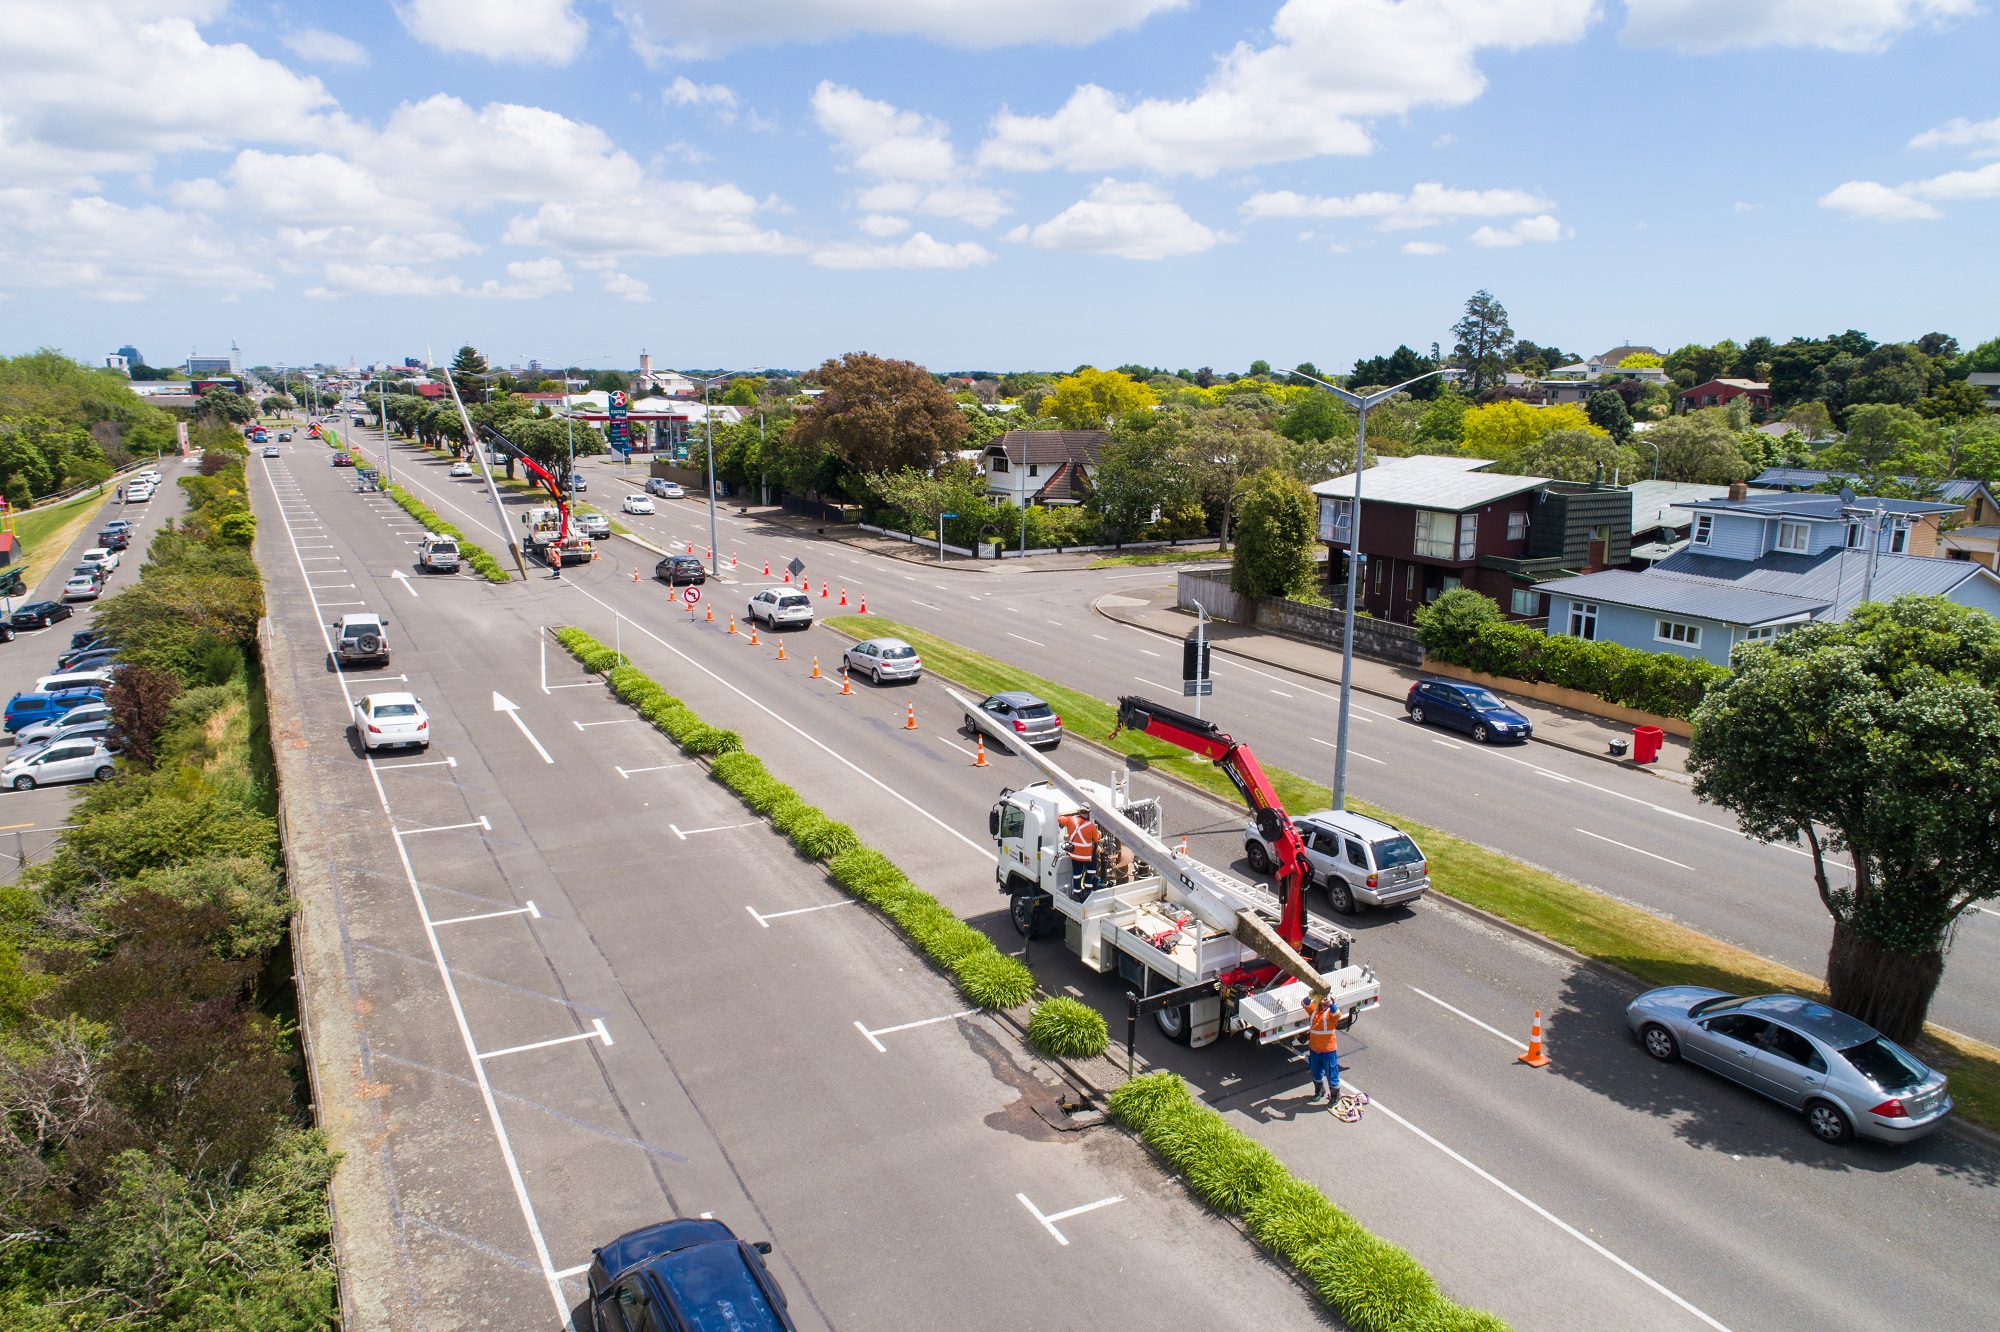 Bird's eye view of Main St, Palmerston North, showing a work truck and cars.